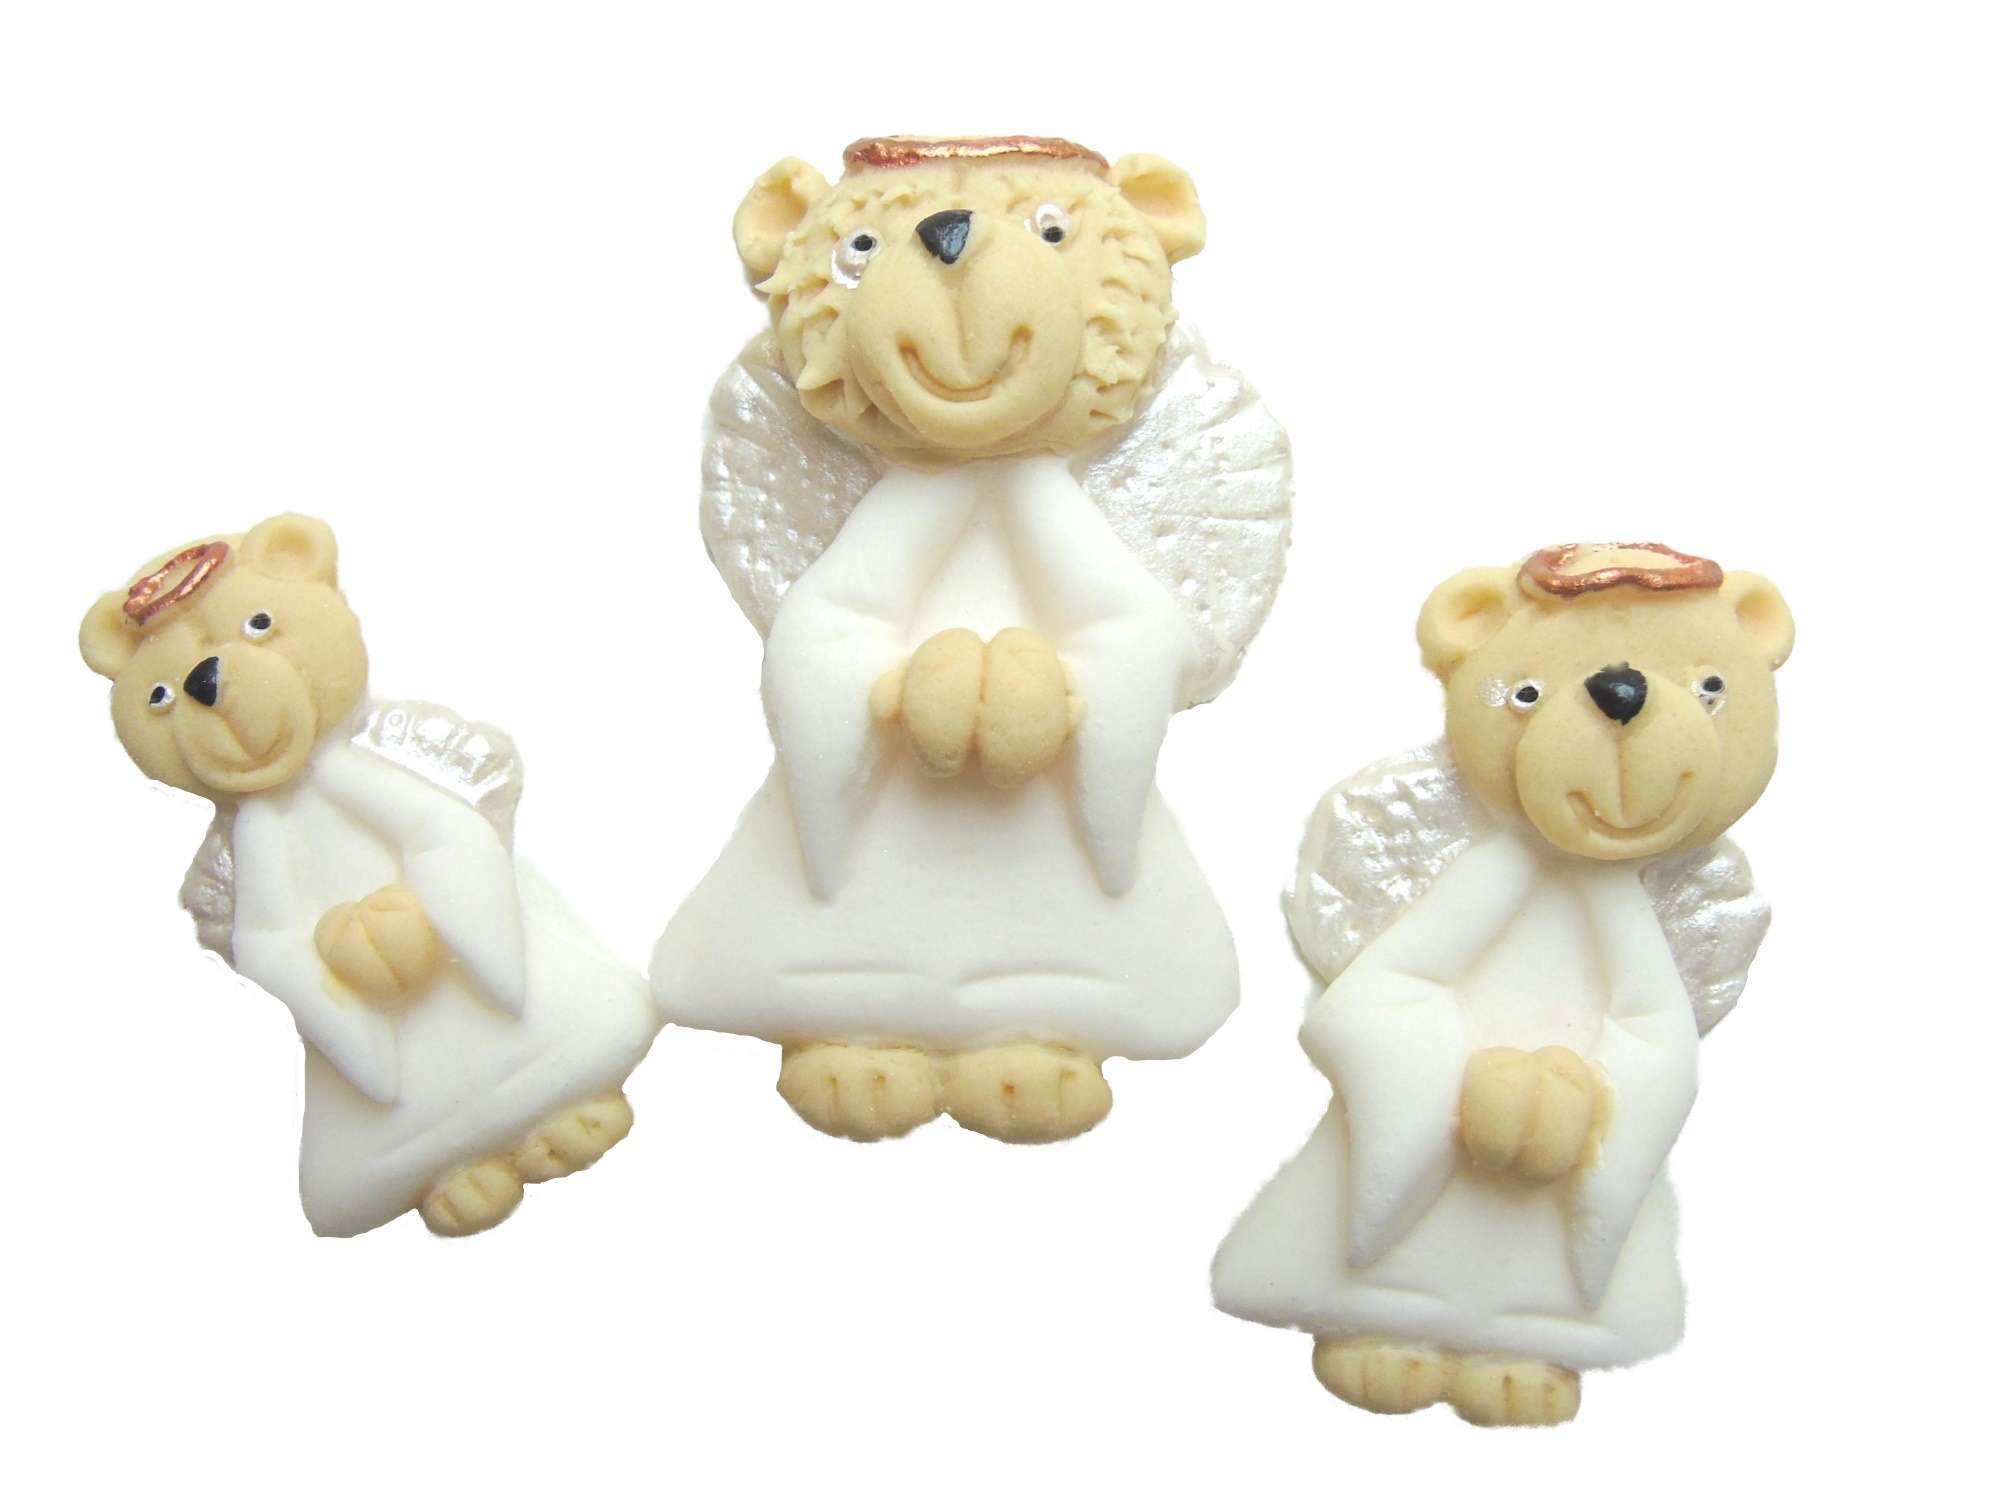 Inked320angels20jpeg LI Are you looking for something different to decorate your Christmas cakes with? Then these lovely Christmas Angel teddys make a great alternative and be a big hit with everyone. Pack of 3 Approx Sizes: 6 cm - 4 cm / 5 cm - 2.5 cm / 4cm - 2cm